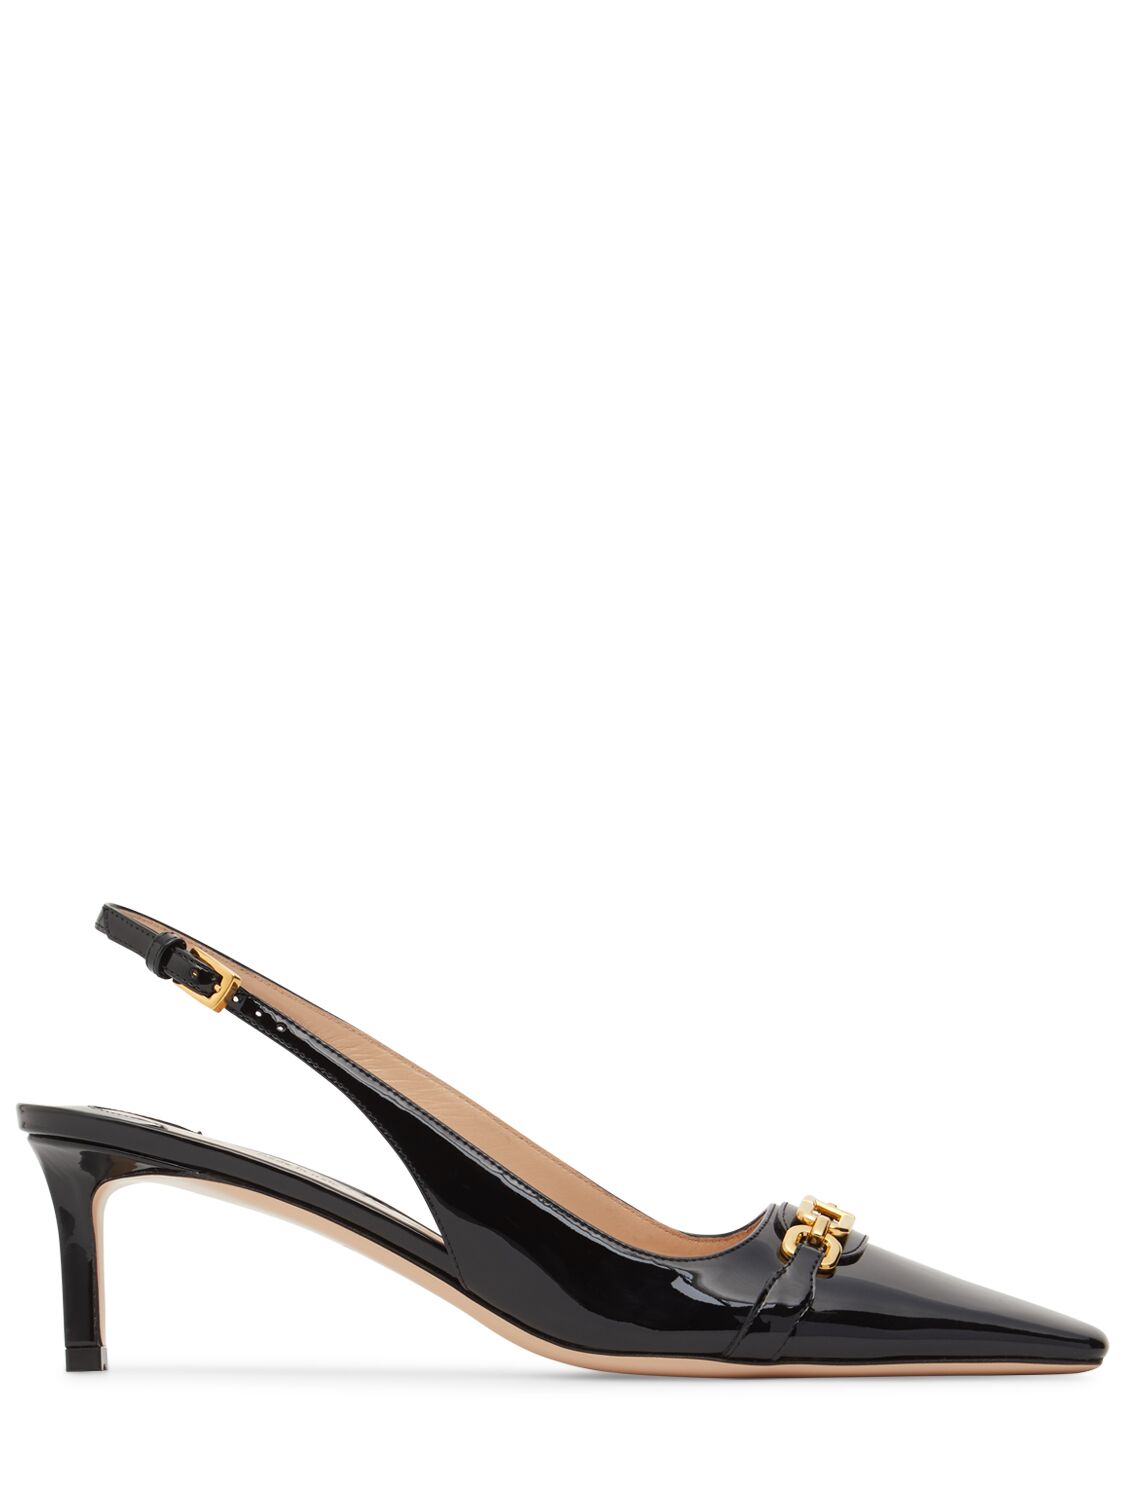 Tom Ford 55mm Patent Leather Slingbacks In Black